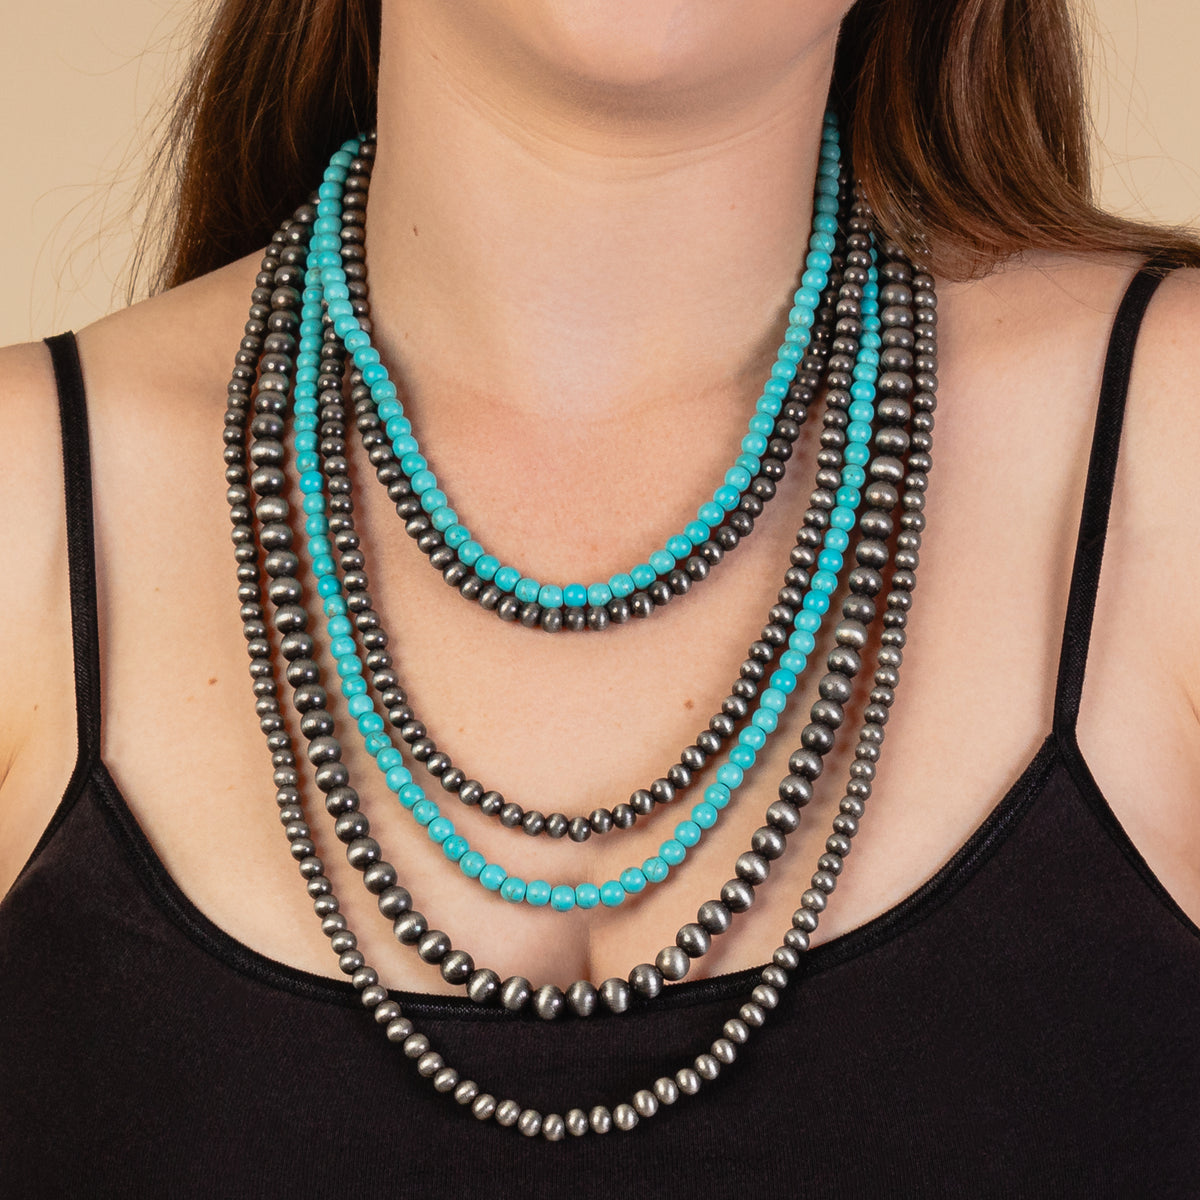 92036 - Layered Beaded Necklace - Turquoise & Silver